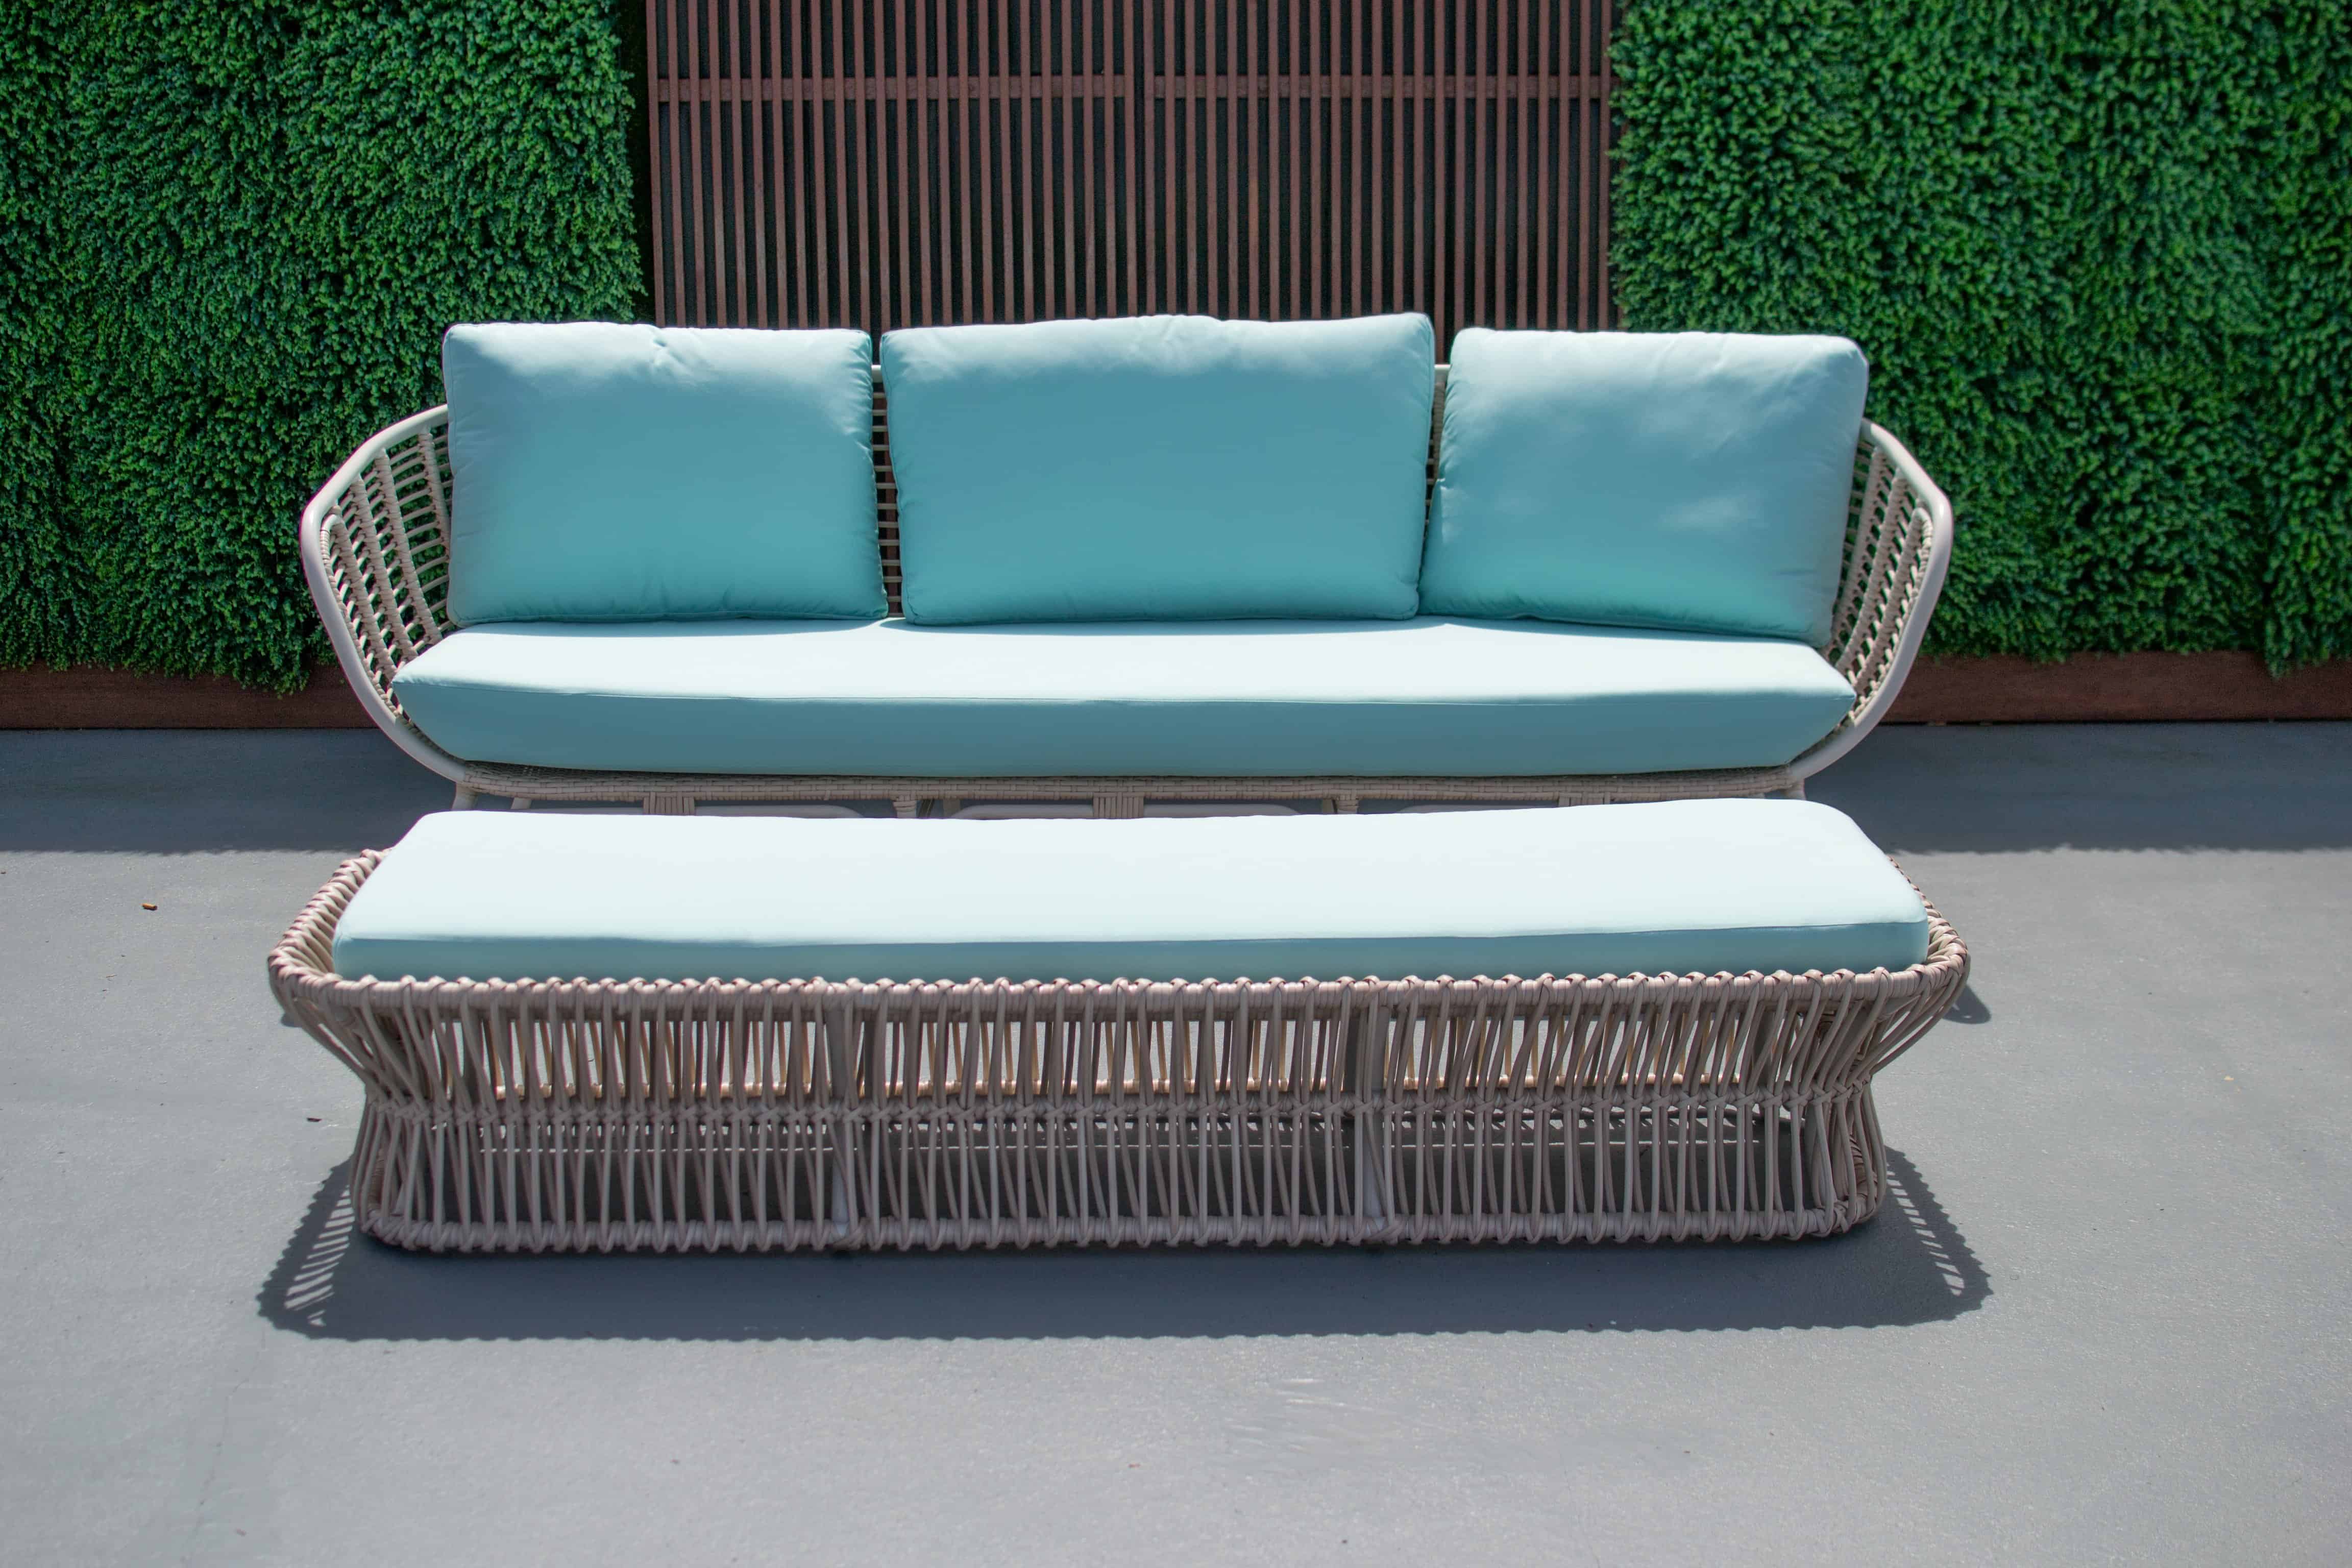 Tucker Oasis 3 seater lounge & Ottoman Piece, Furniture, Tucker from the original BBQ Factory